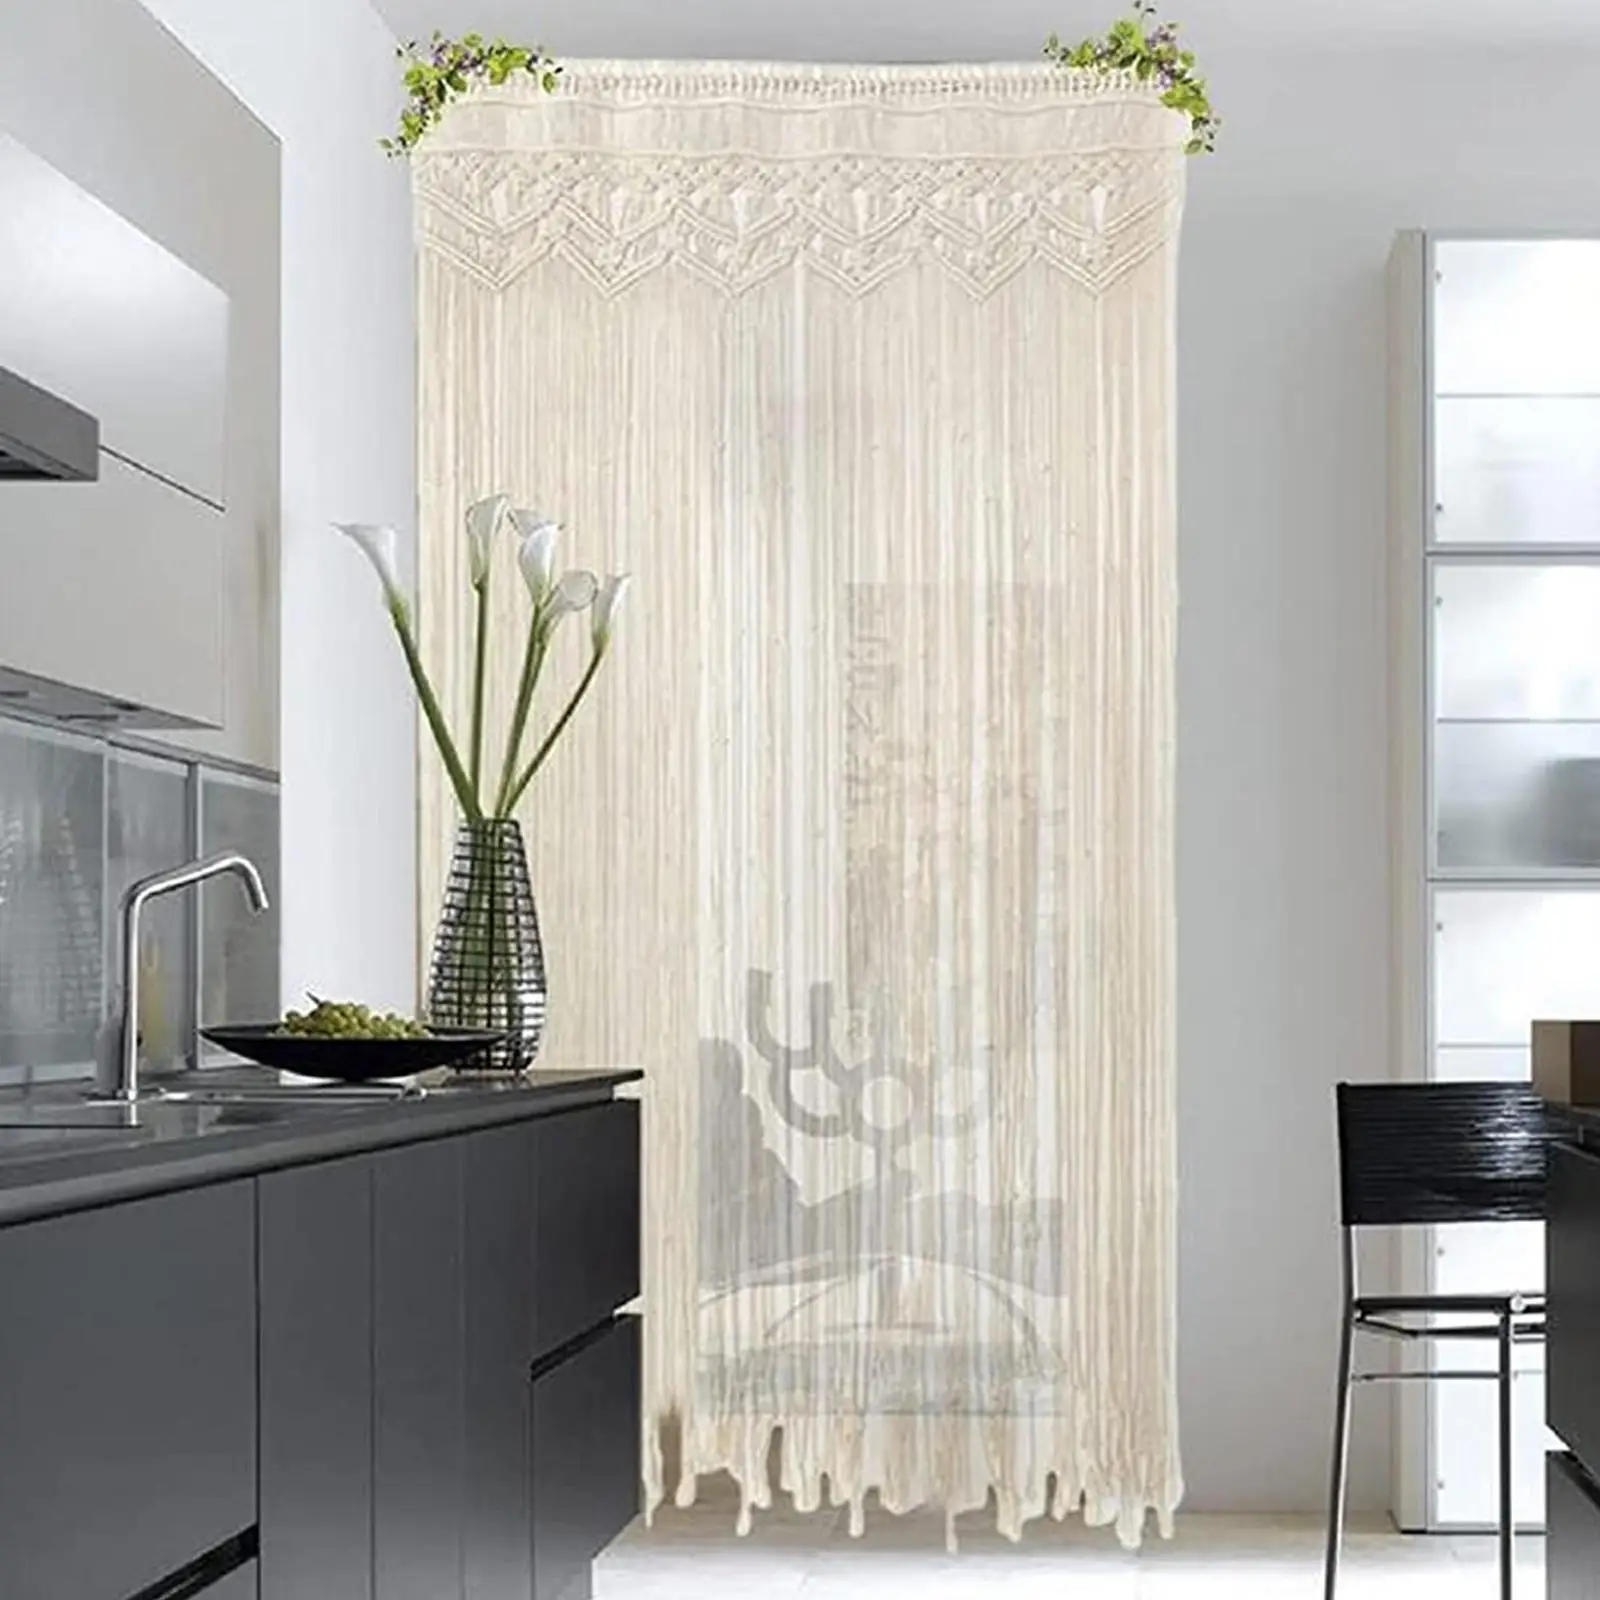 Handmade Macrame Tapestry Curtain Cotton Rope Woven Tapestry Wall Hanging Tapestry for Office Restaurant Decoration